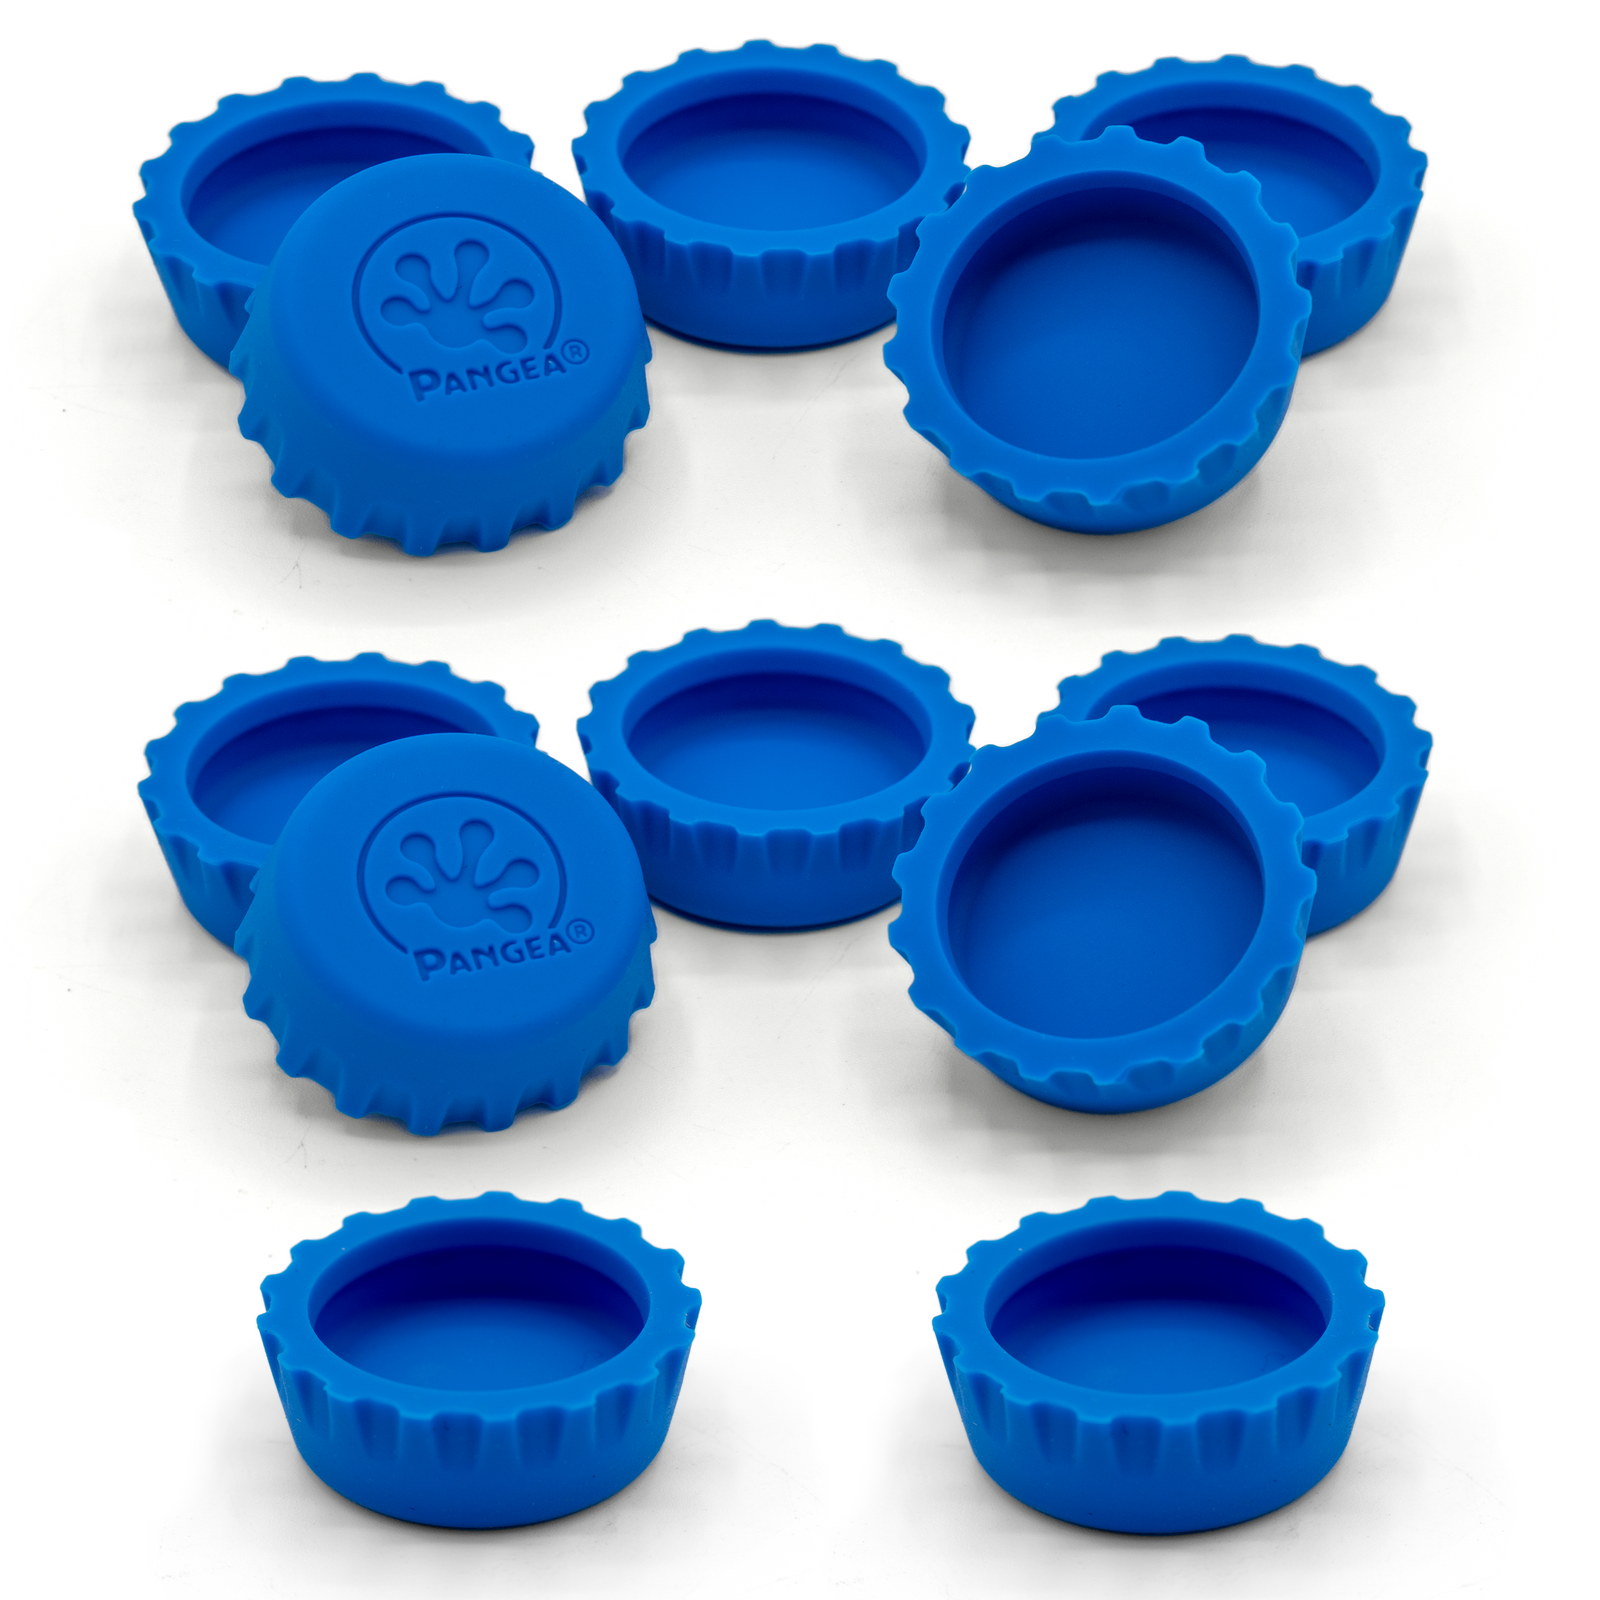 https://cdn.shopify.com/s/files/1/0089/8567/3828/products/12-PackSiliconeBottleCap-Blue_1600x.png?v=1666198667